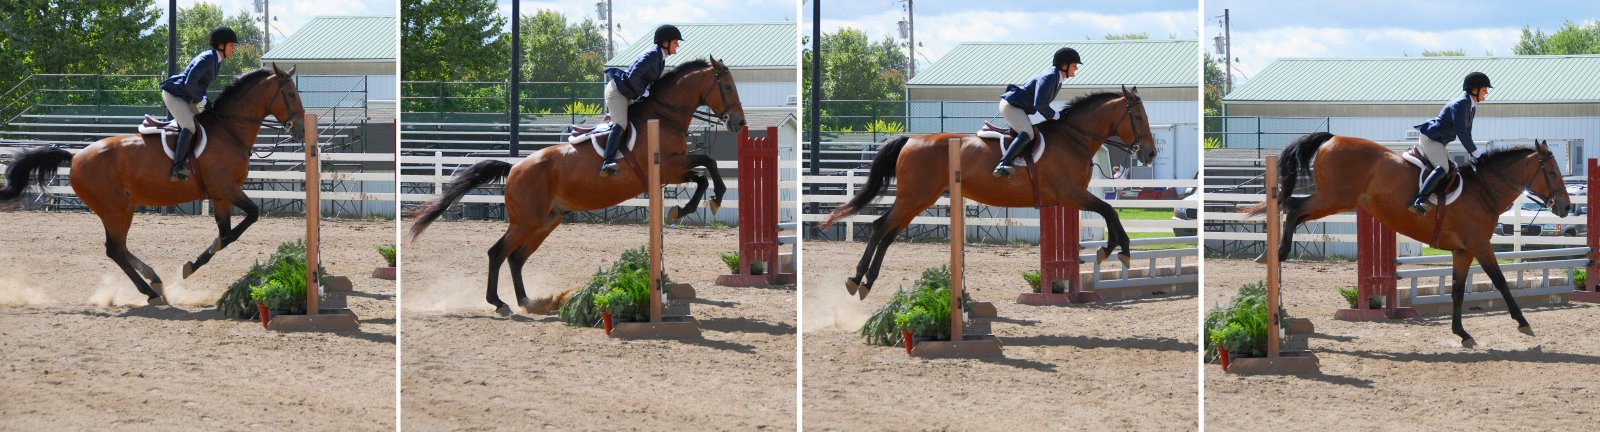 Show_jumping_sequence,_Delaware.jpg